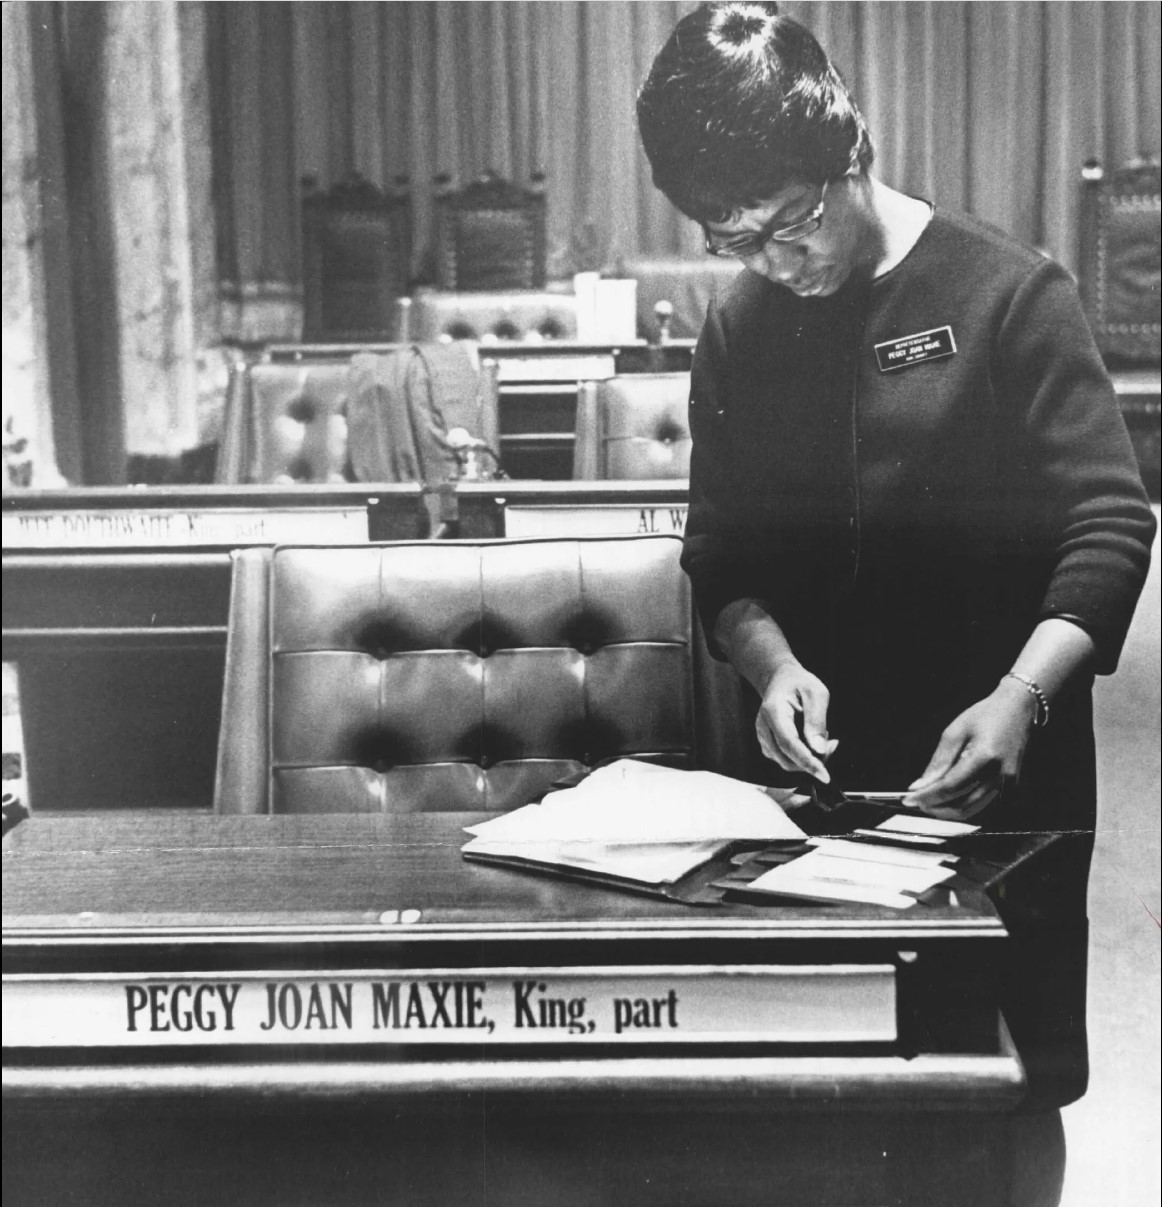 Picture of a Peggy Joan Maxie with a desk looking at an open folder.